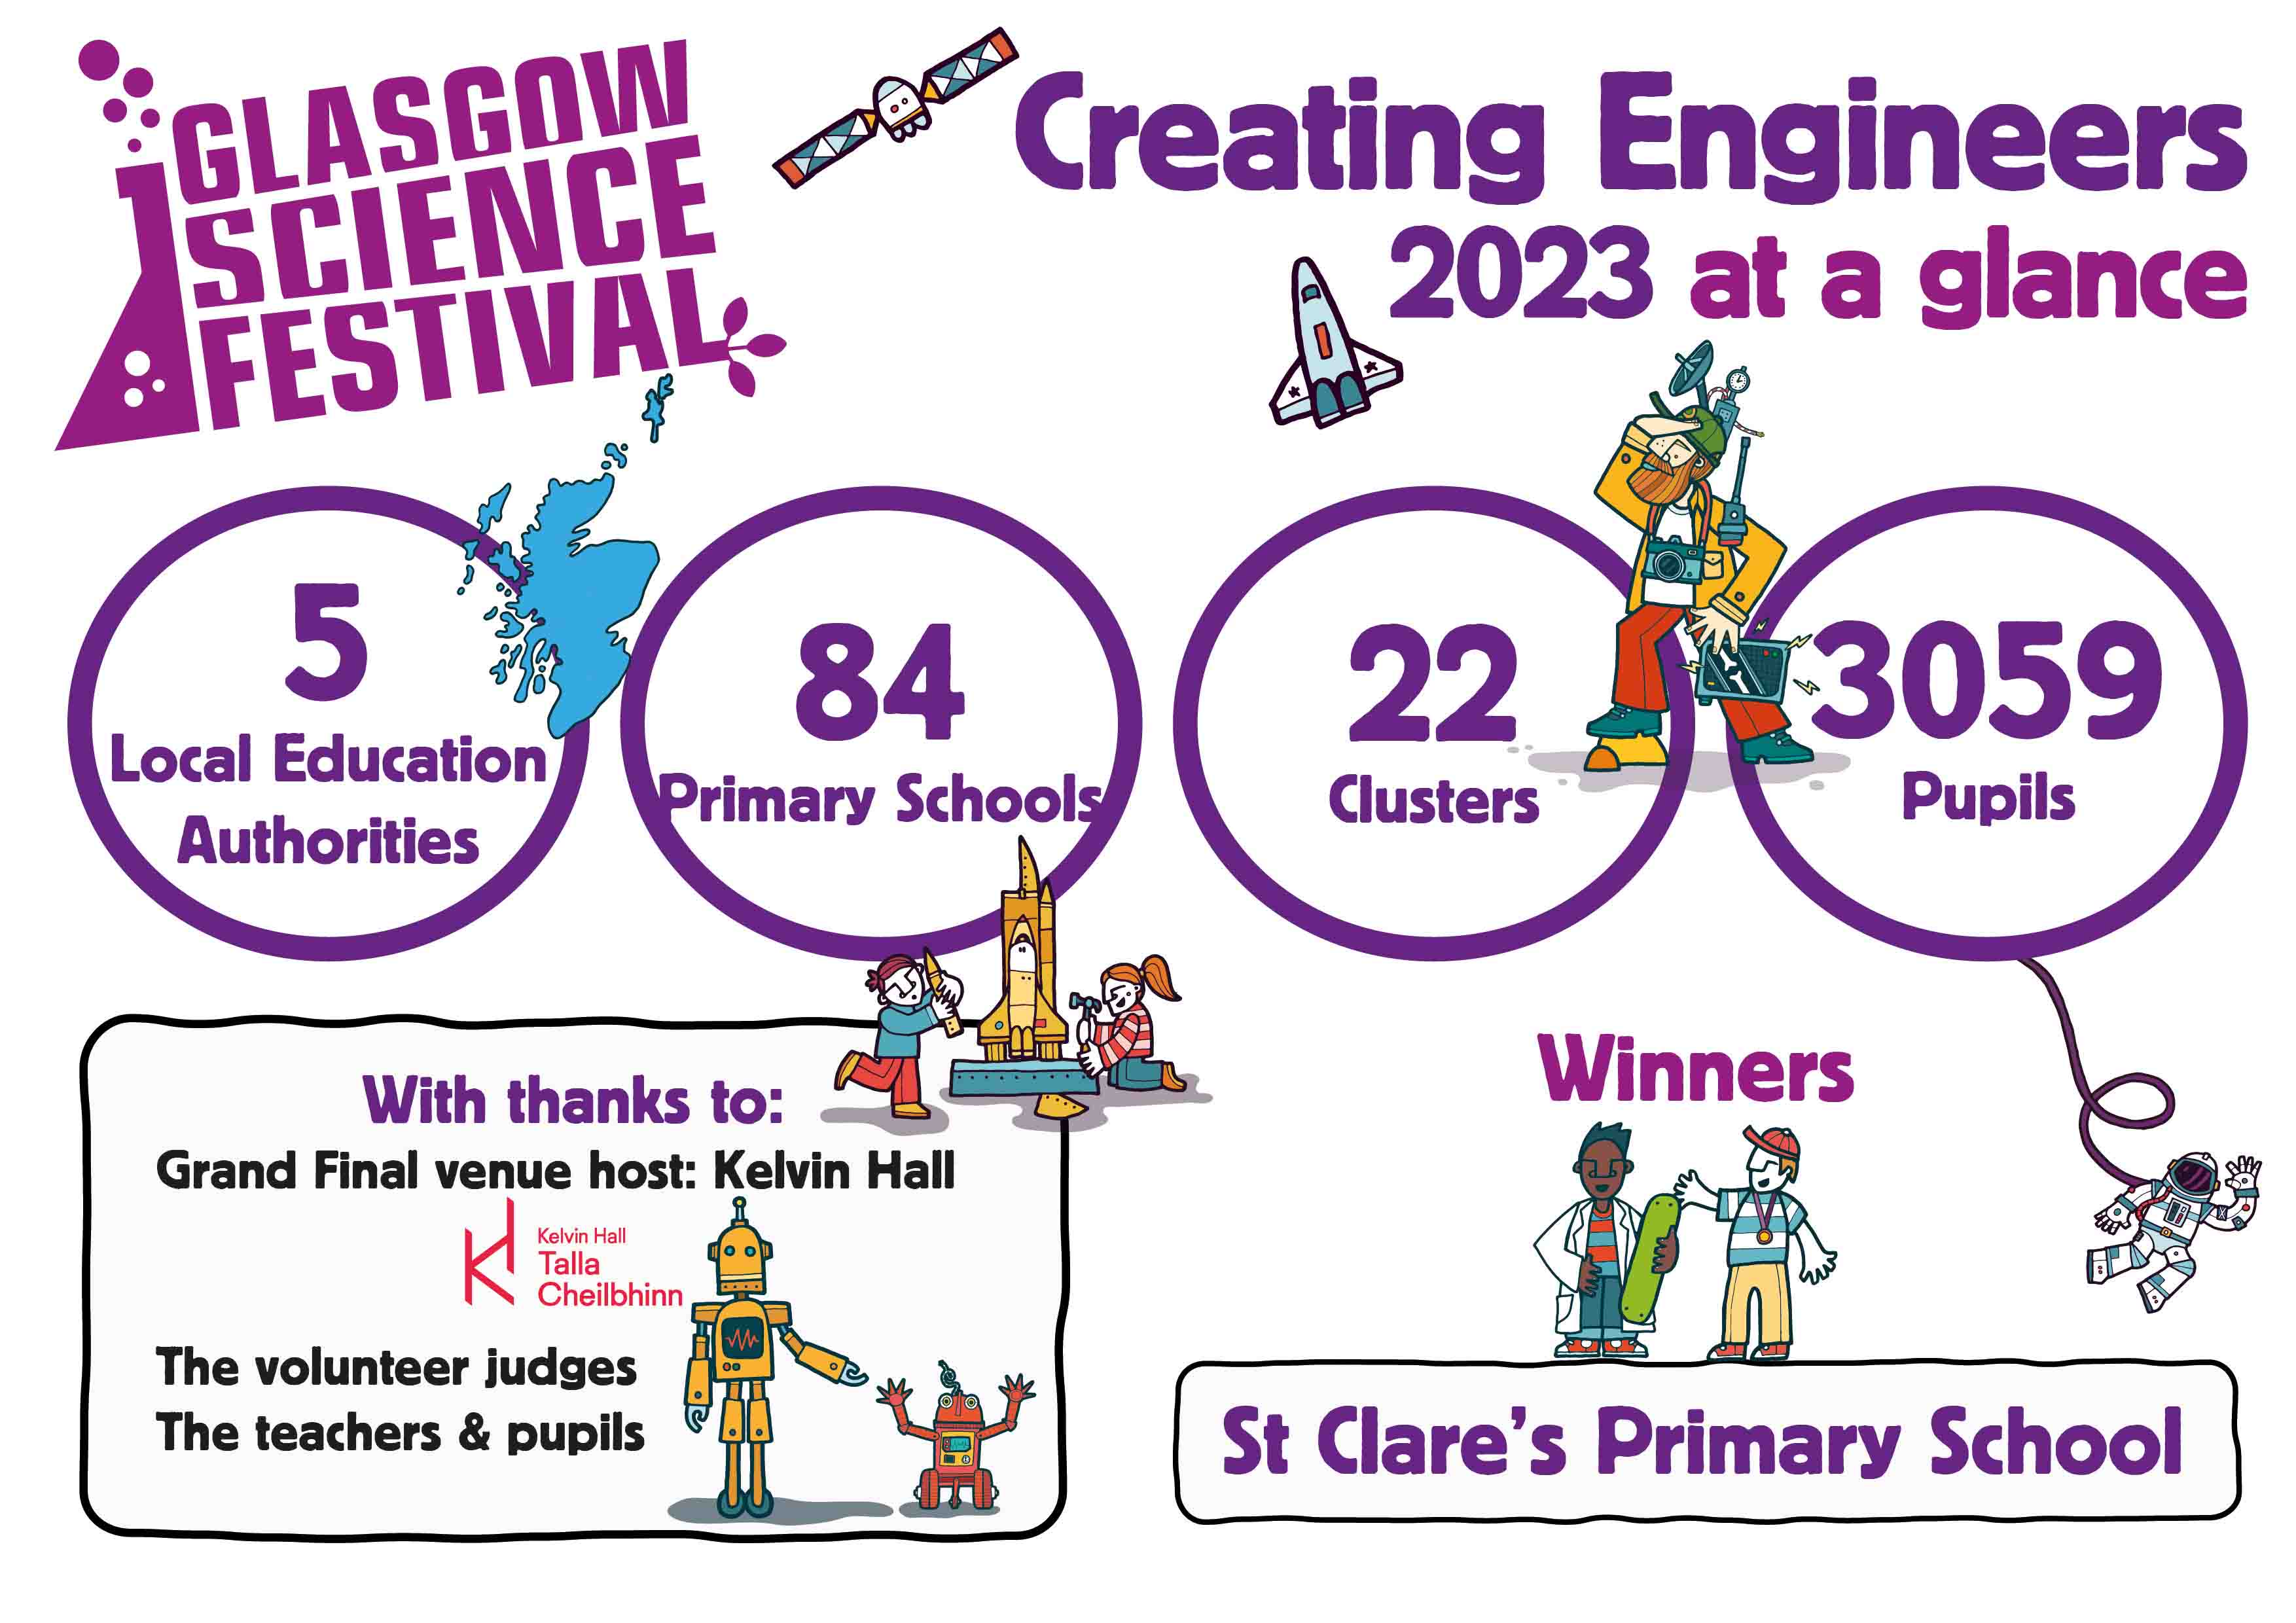 Summary image of the 2023 Creating Engineers competition. Text reads: Creating Engineers 2023 at a glance, 5 local education authorities, 84 primary schools, 22 clusters, 3059 pupils. With thanks to: grand final venue host Kelvin Hall, the volunteer judges, the teachers and pupils. Winners St Clare's primary school. 